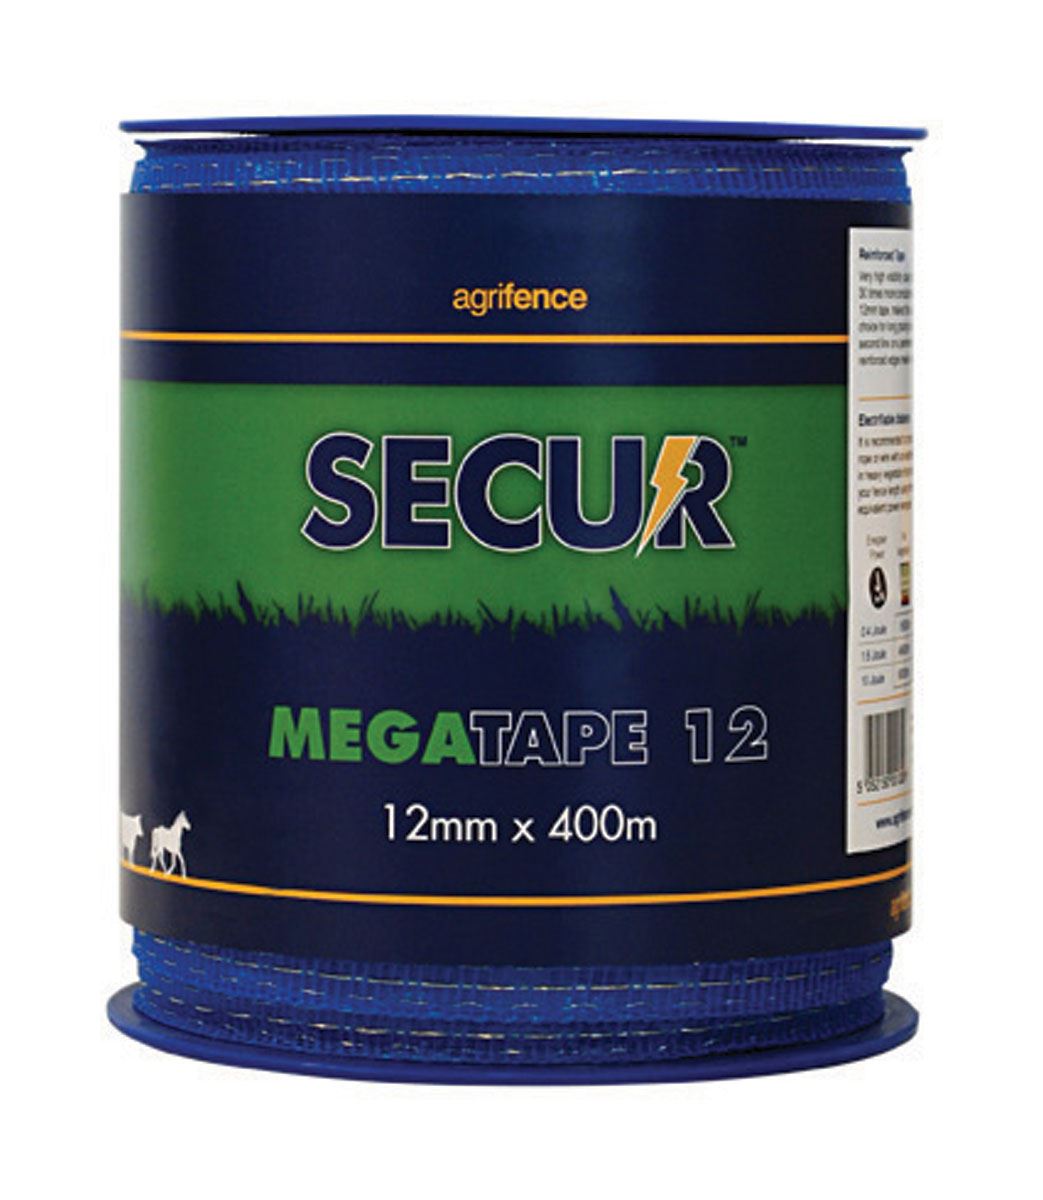 Agrifence Megatape Reinforced Tape (H4758) - Just Horse Riders